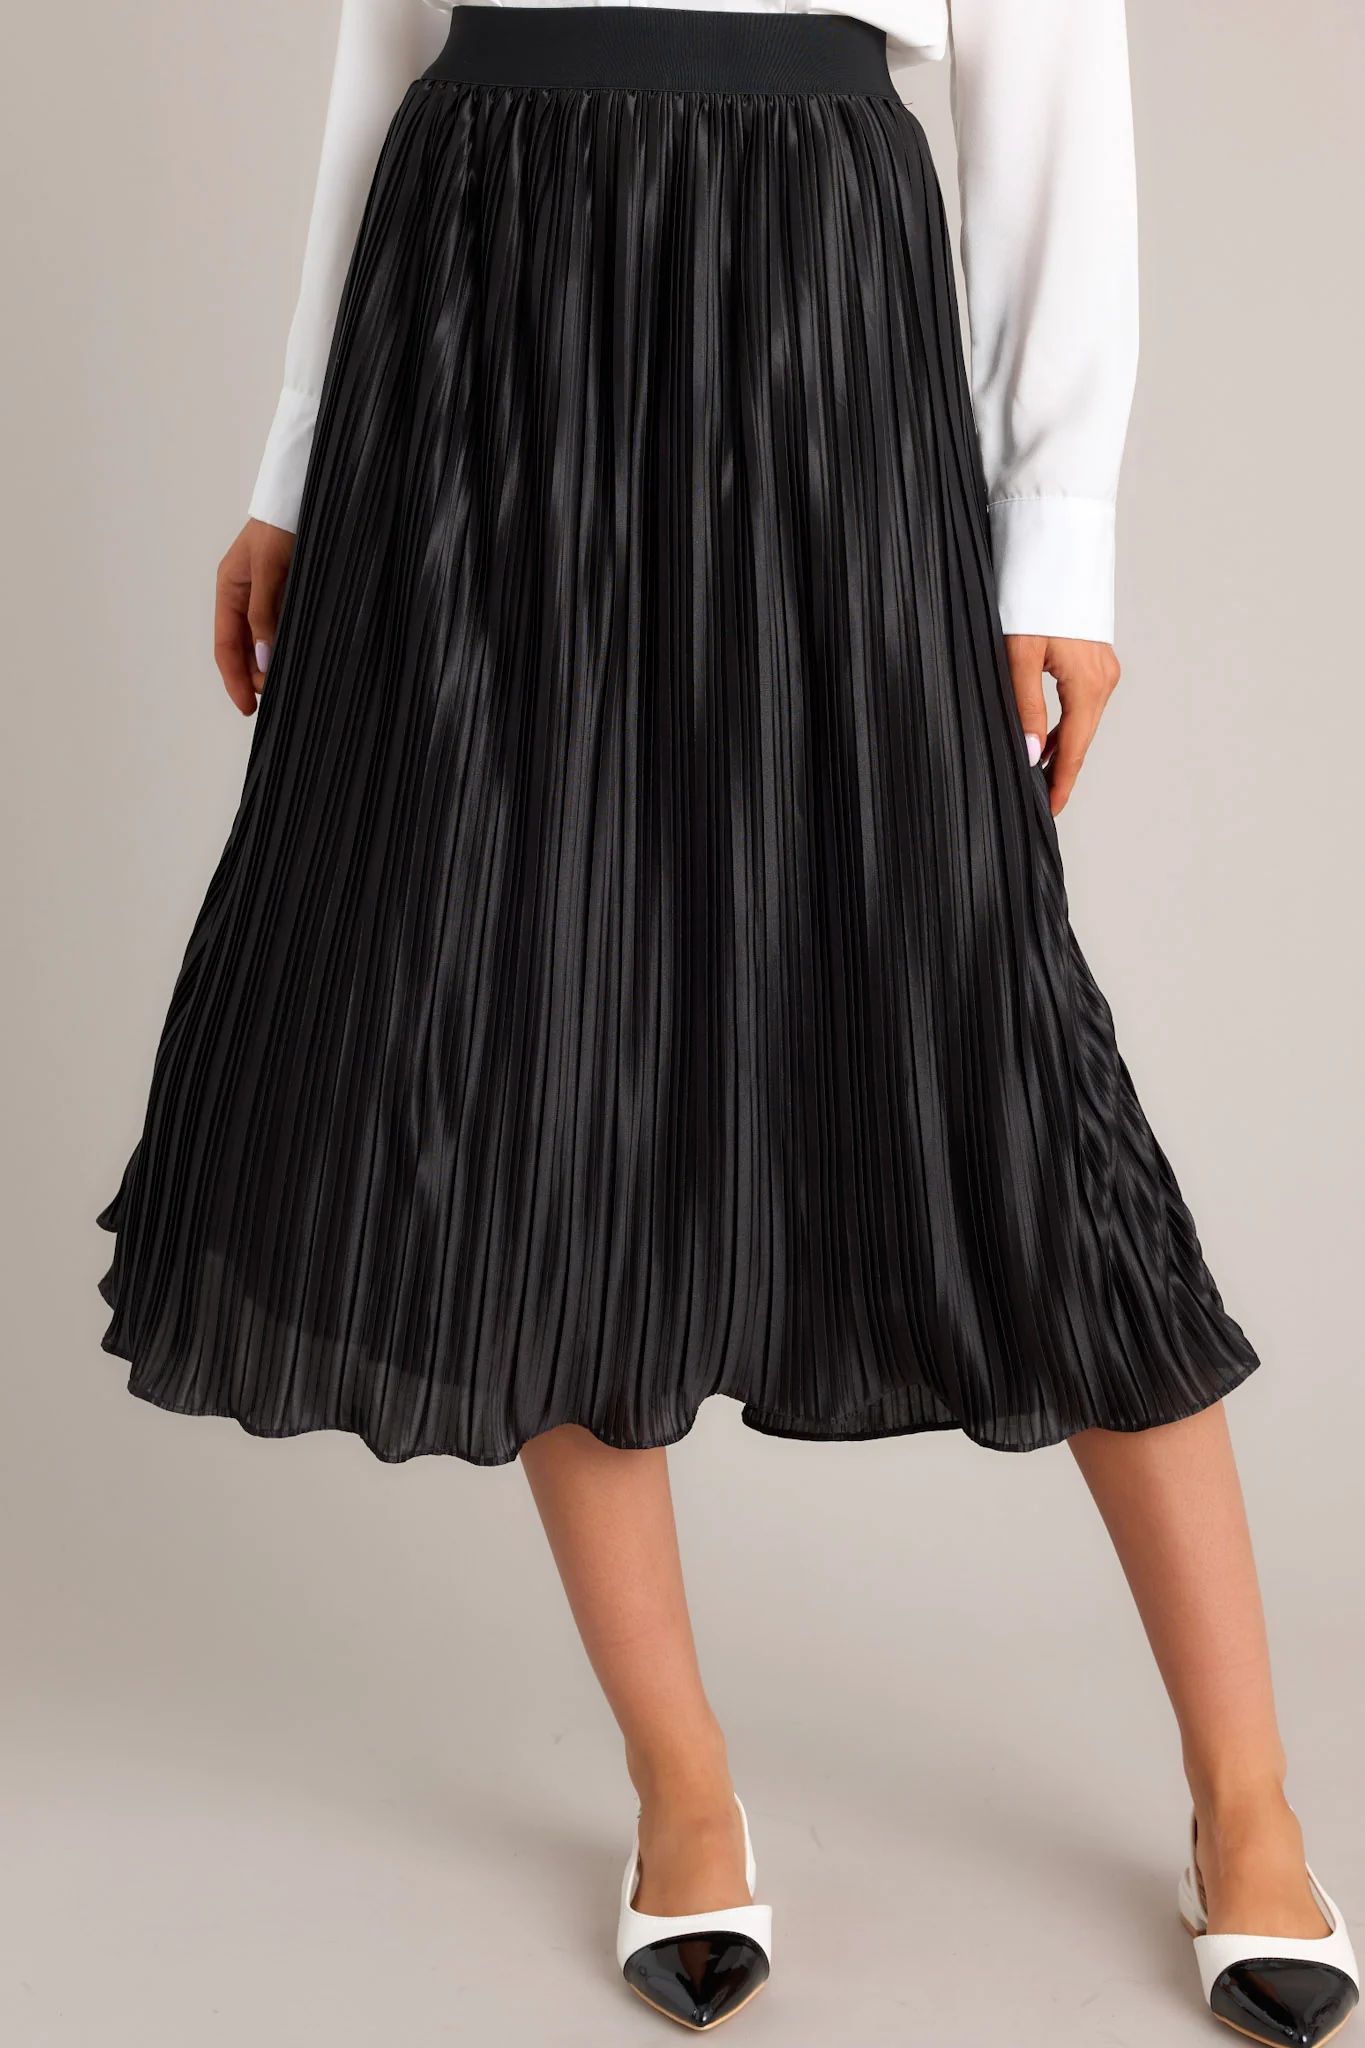 Try And Try Again Black Pleated Midi Skirt | Red Dress